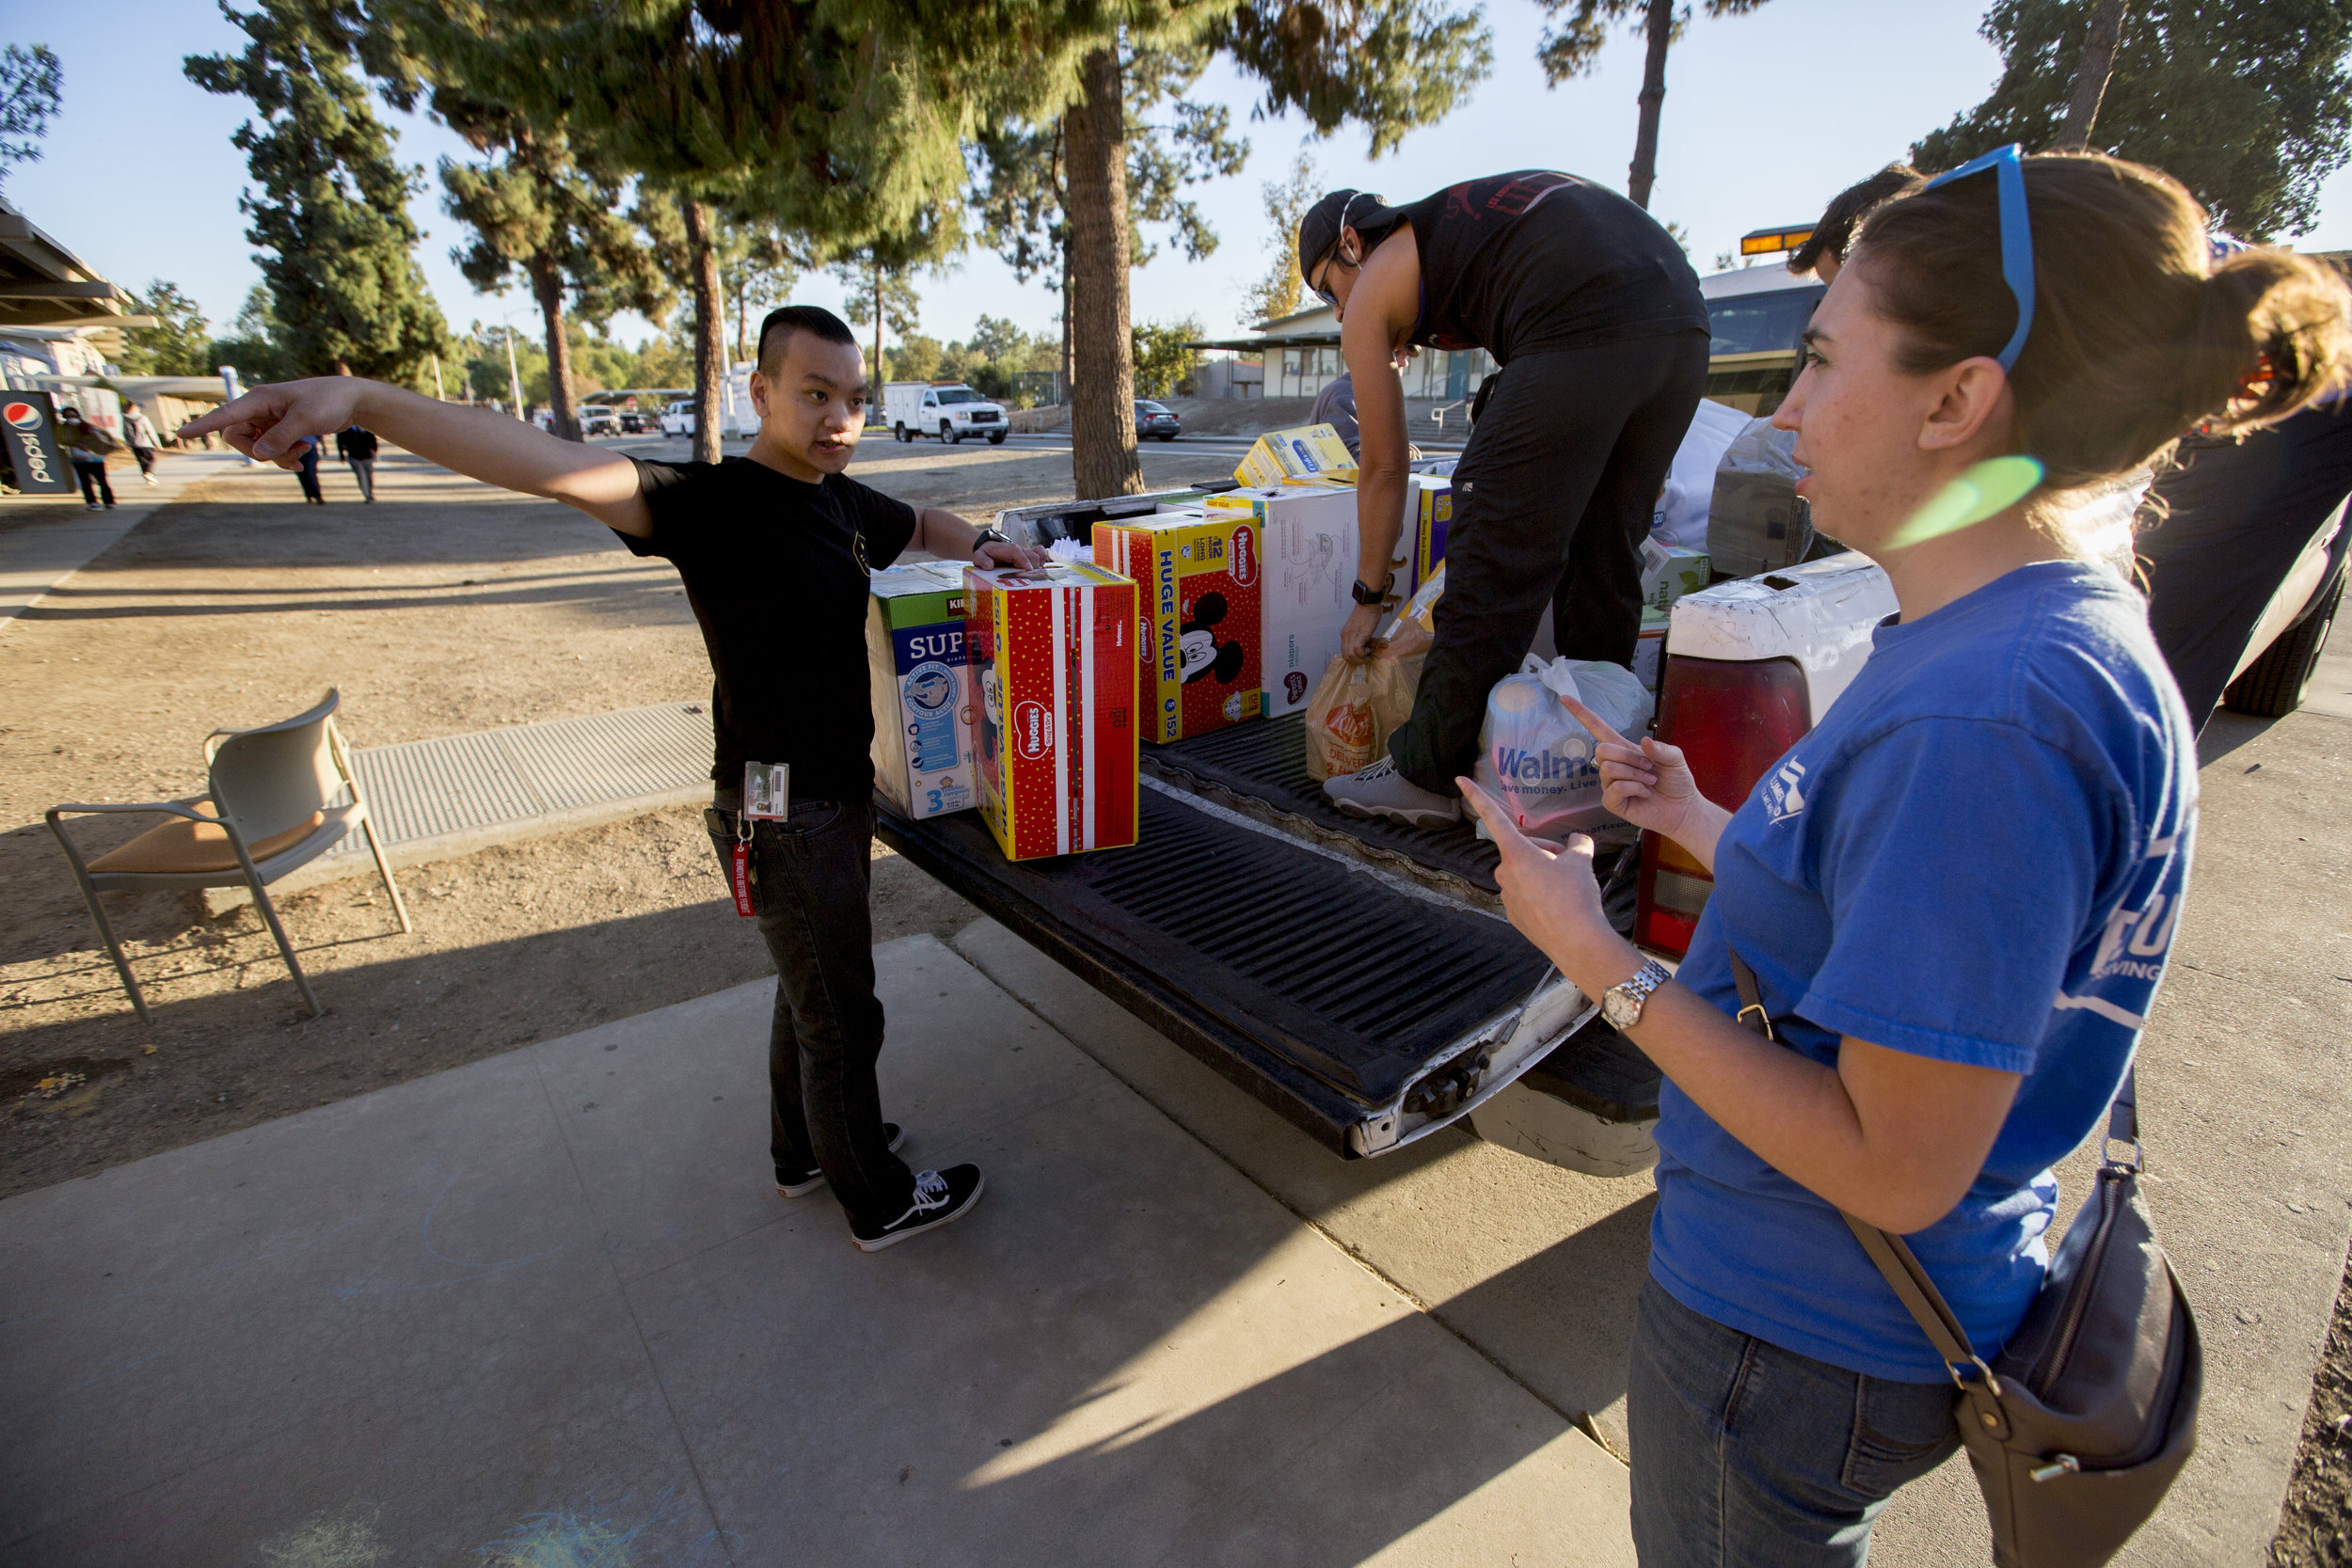  Volunteers unload supplies to help care for evacuees at the Woolsey fire evacuation center set up at Los Angeles Pierce College on November 9, 2018 in Woodland Hills, Calif. (Jose Lopez) 